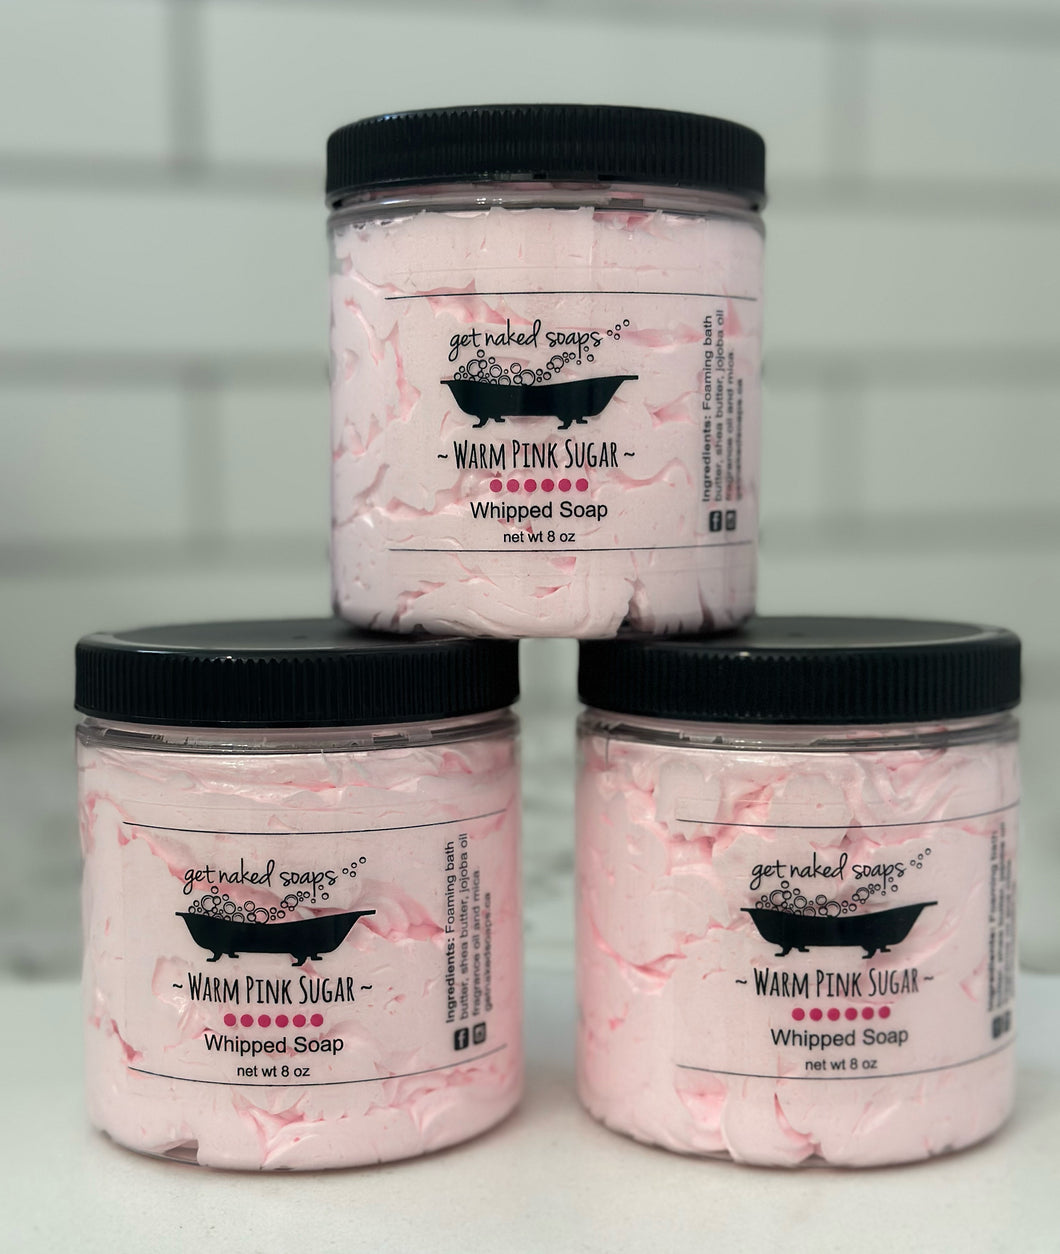 Warm Pink Sugar Whipped Soap